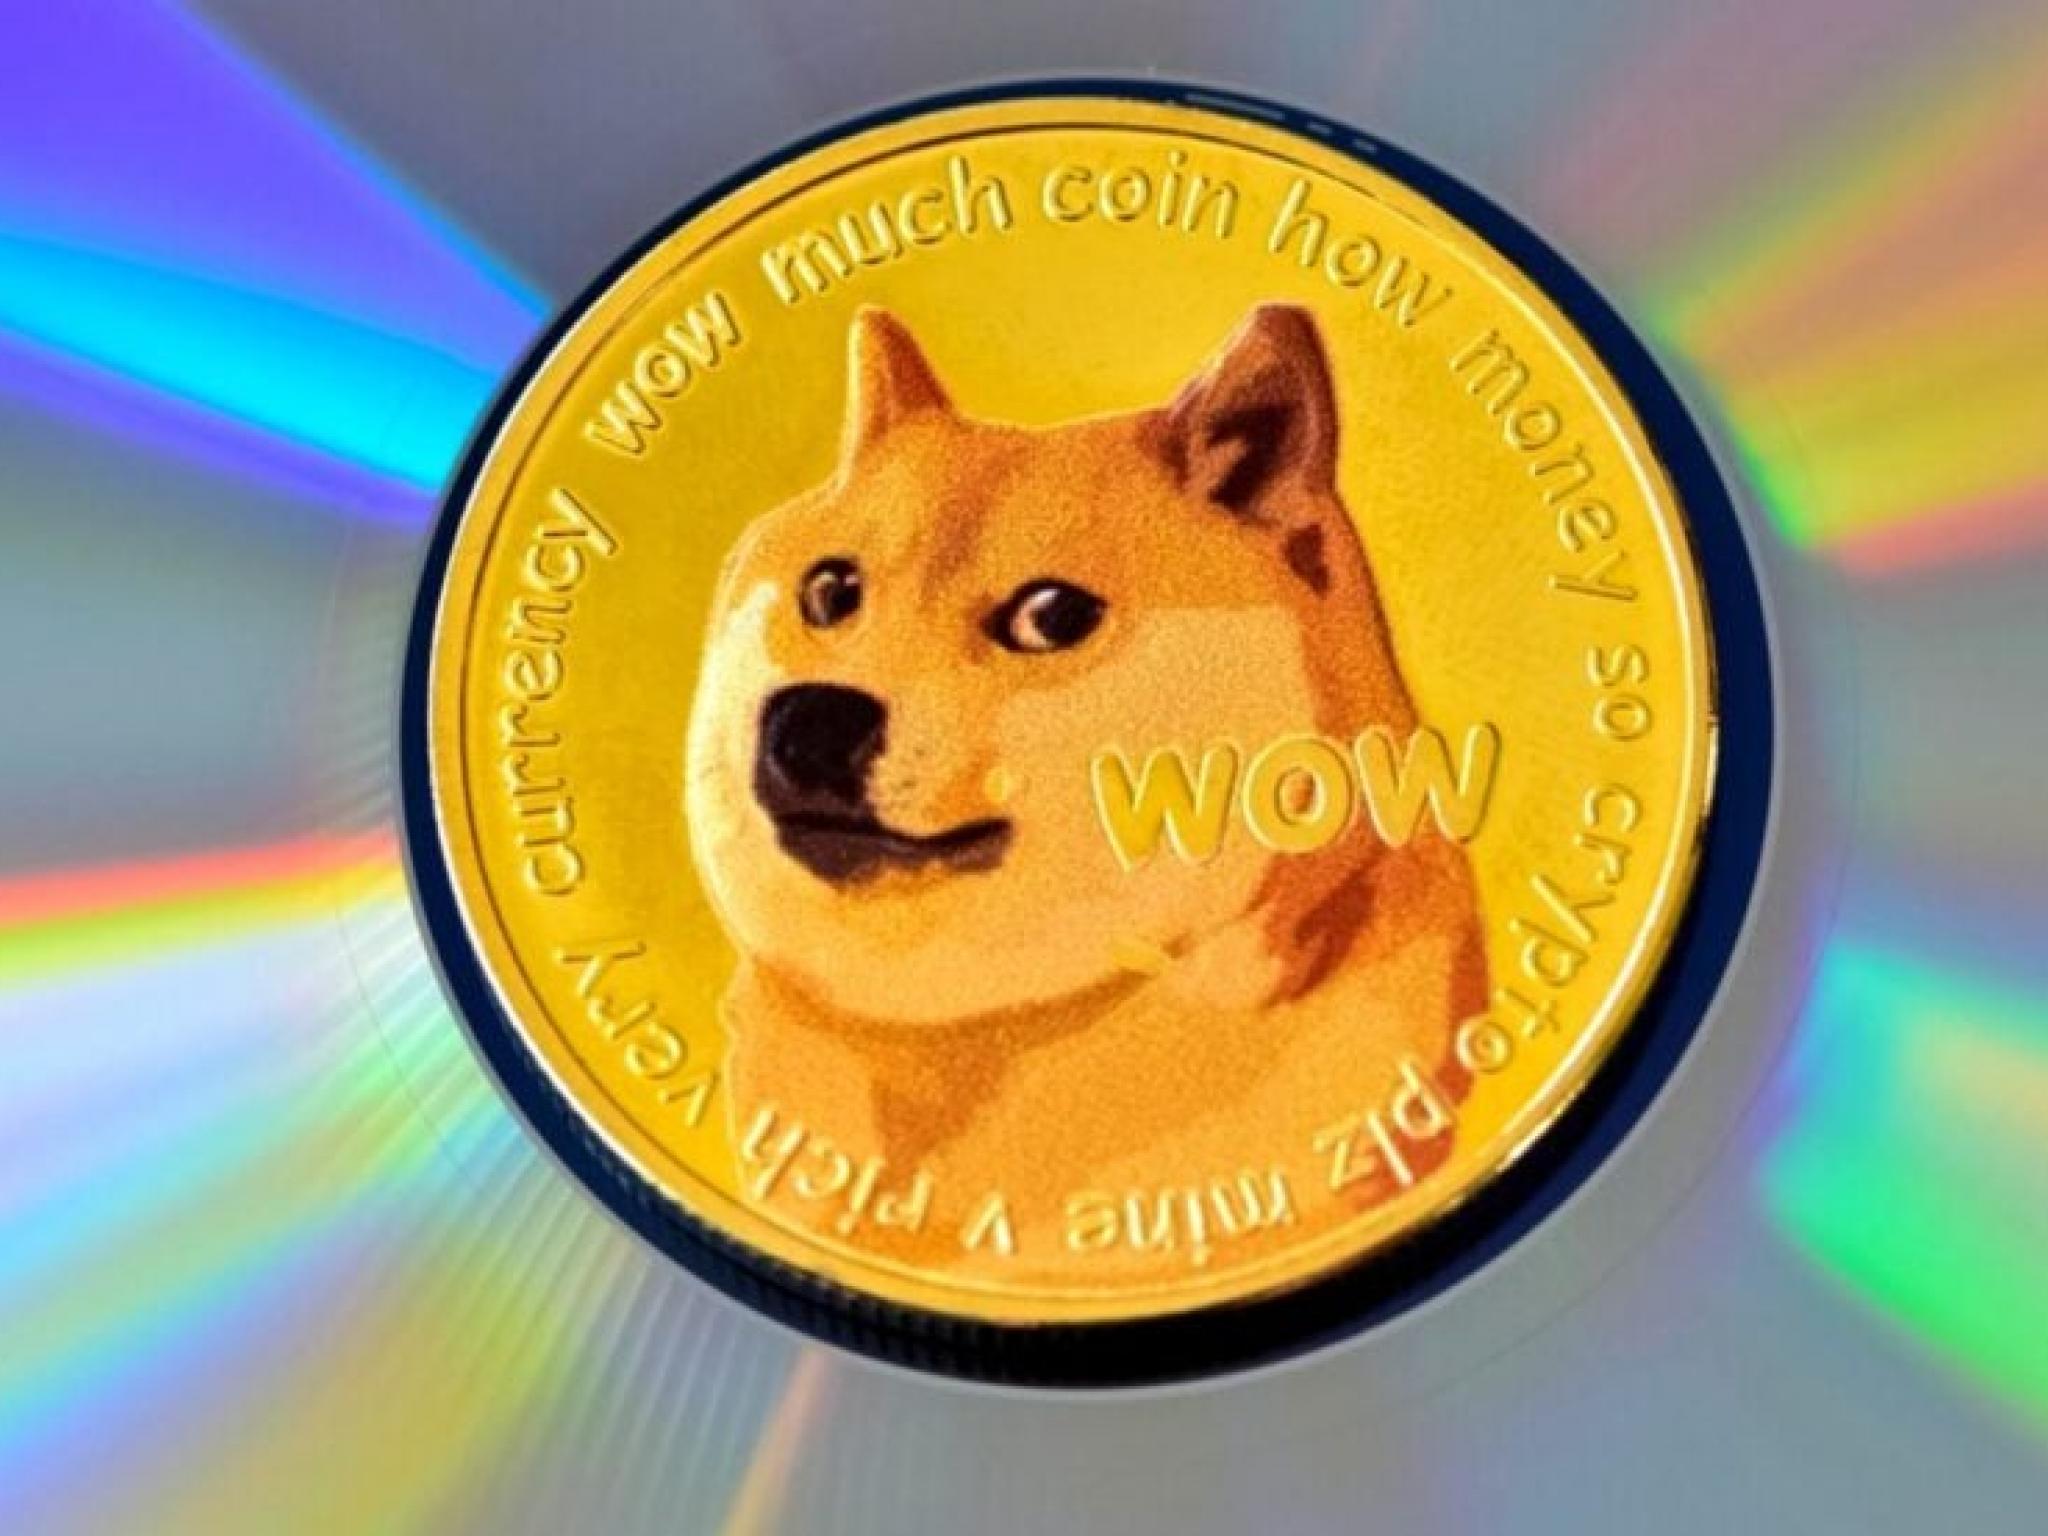  trader-pockets-930k-with-doge-pepe-trade-but-beware-of-painful-mistakes-when-using-leverage 